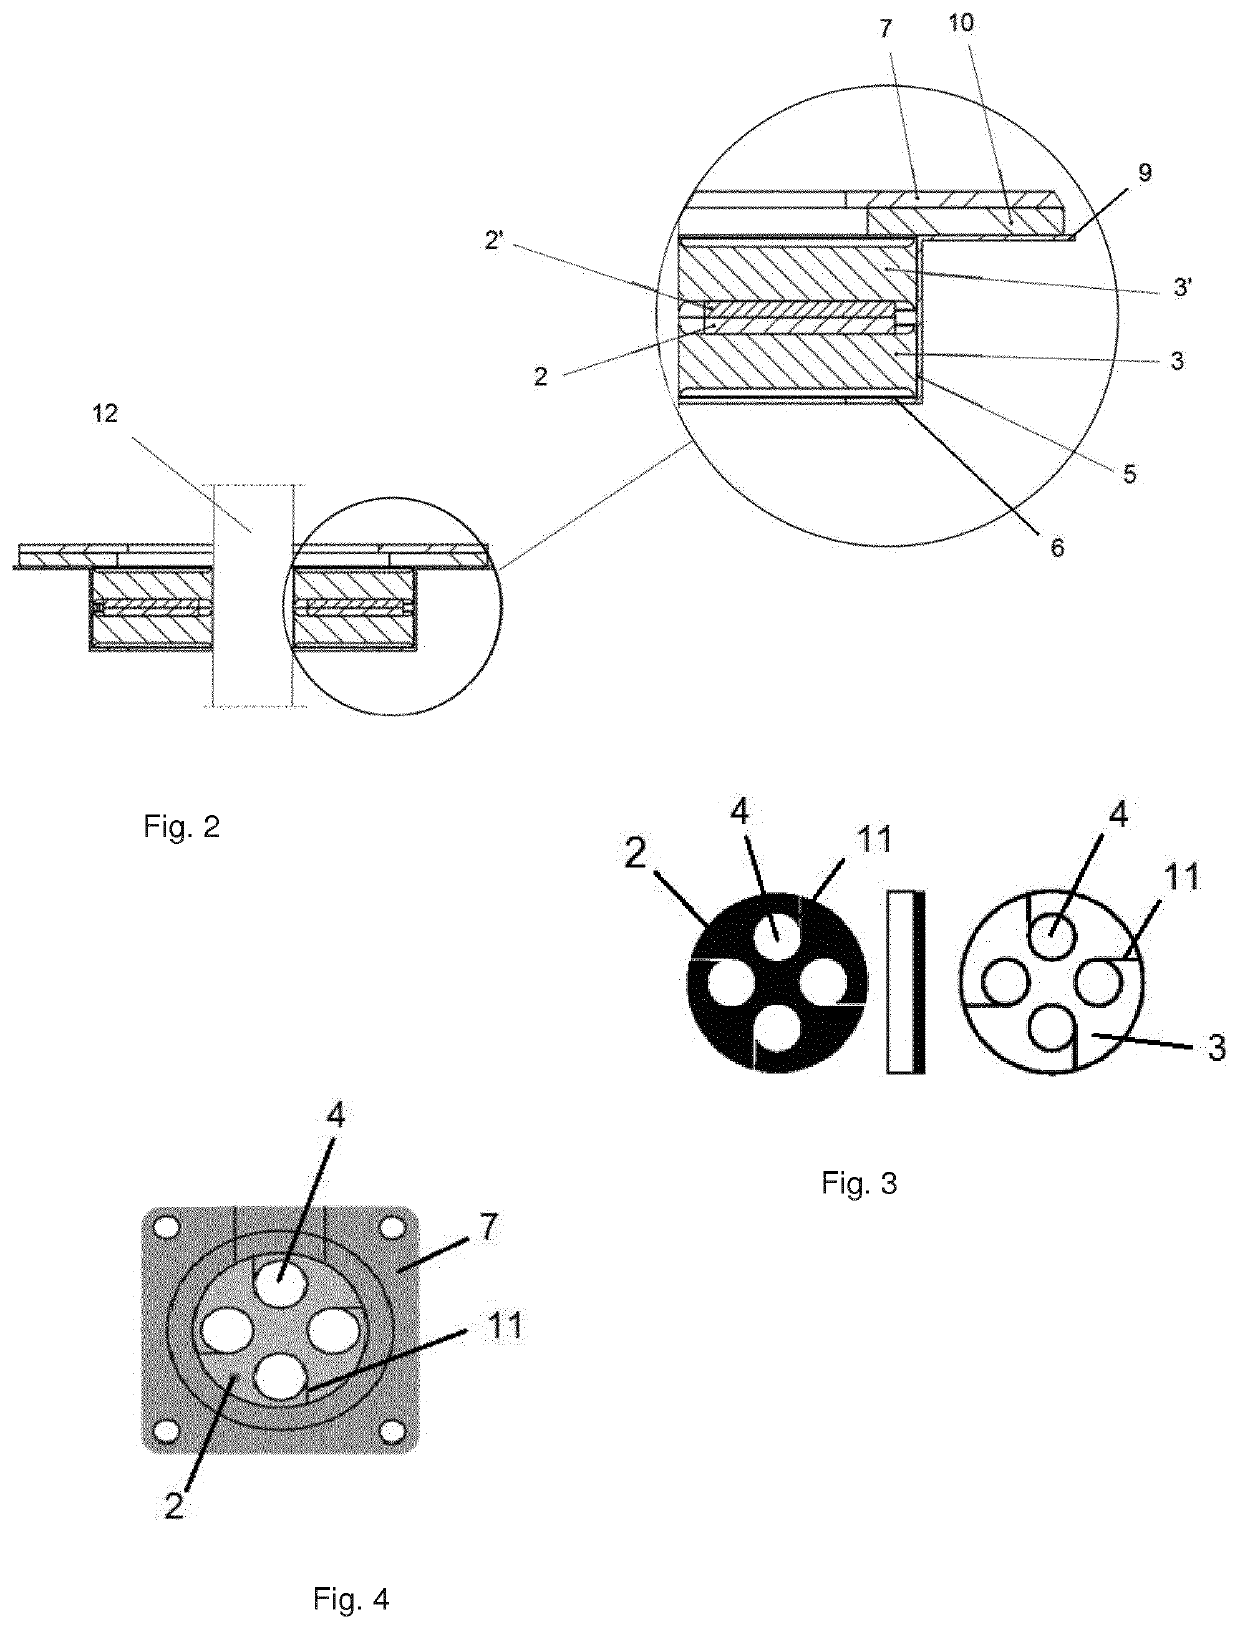 Firestop penetration device and sealing system